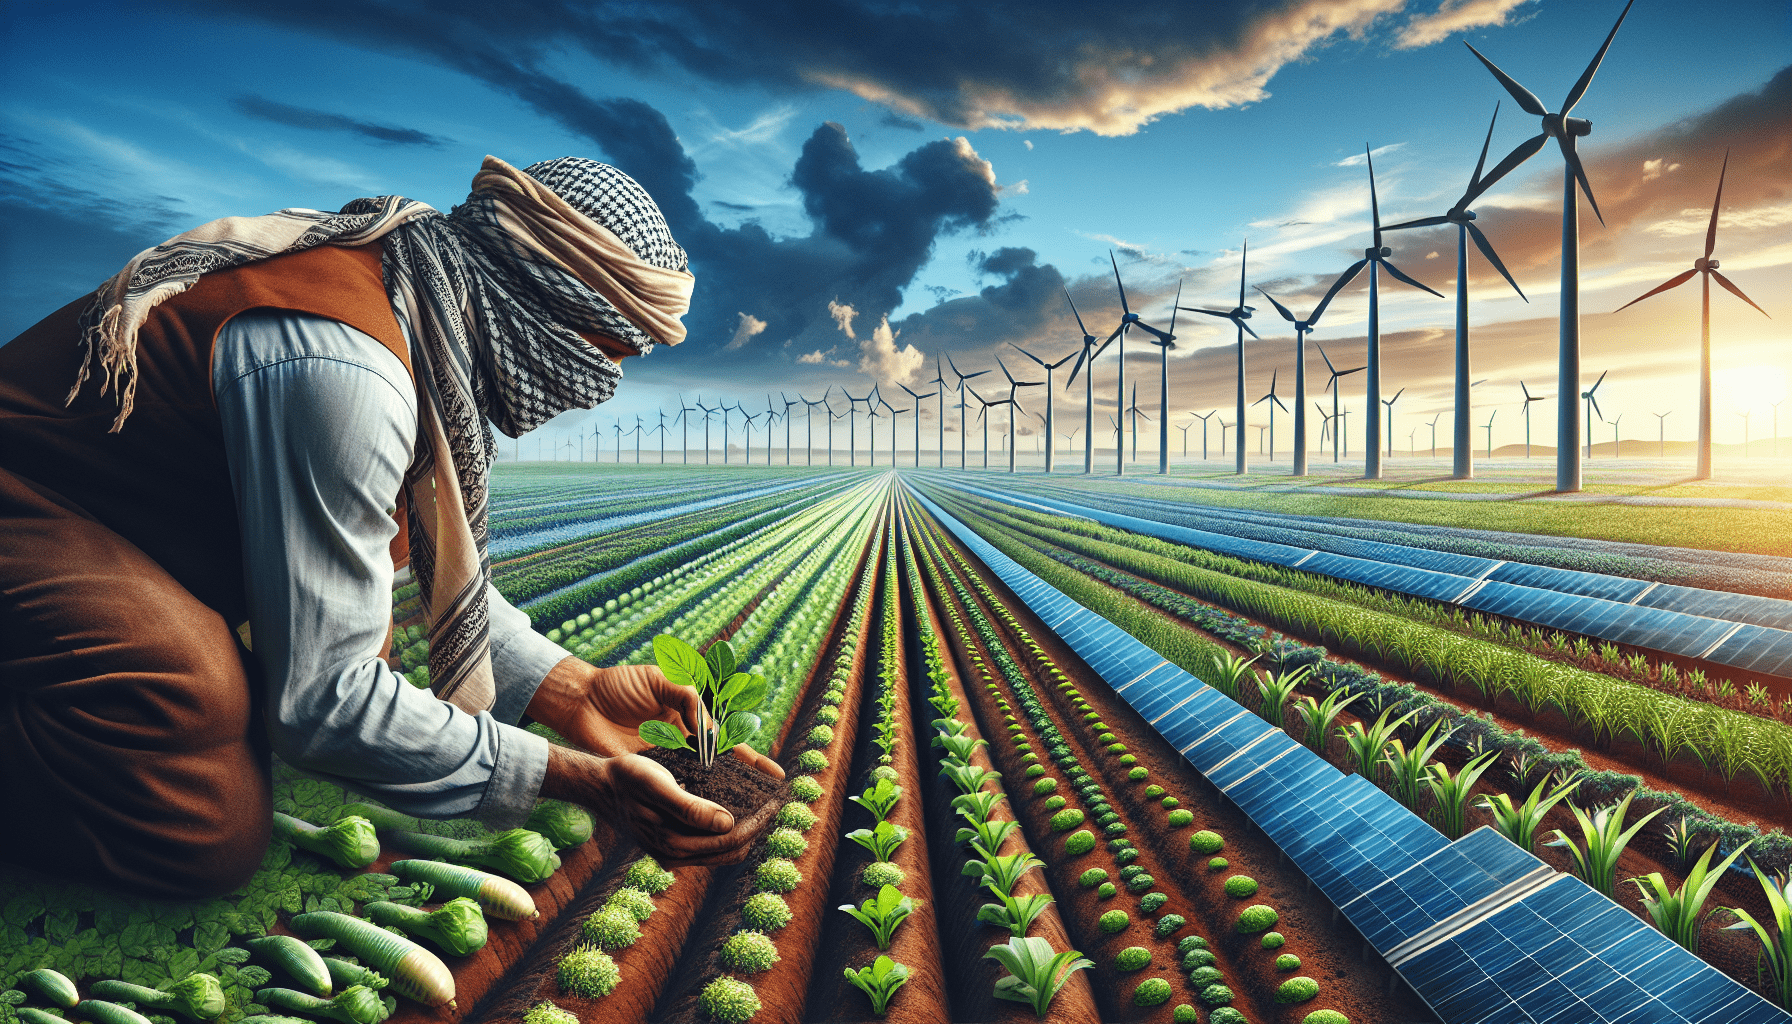 How Does Sustainable Food Production Impact The Environment?